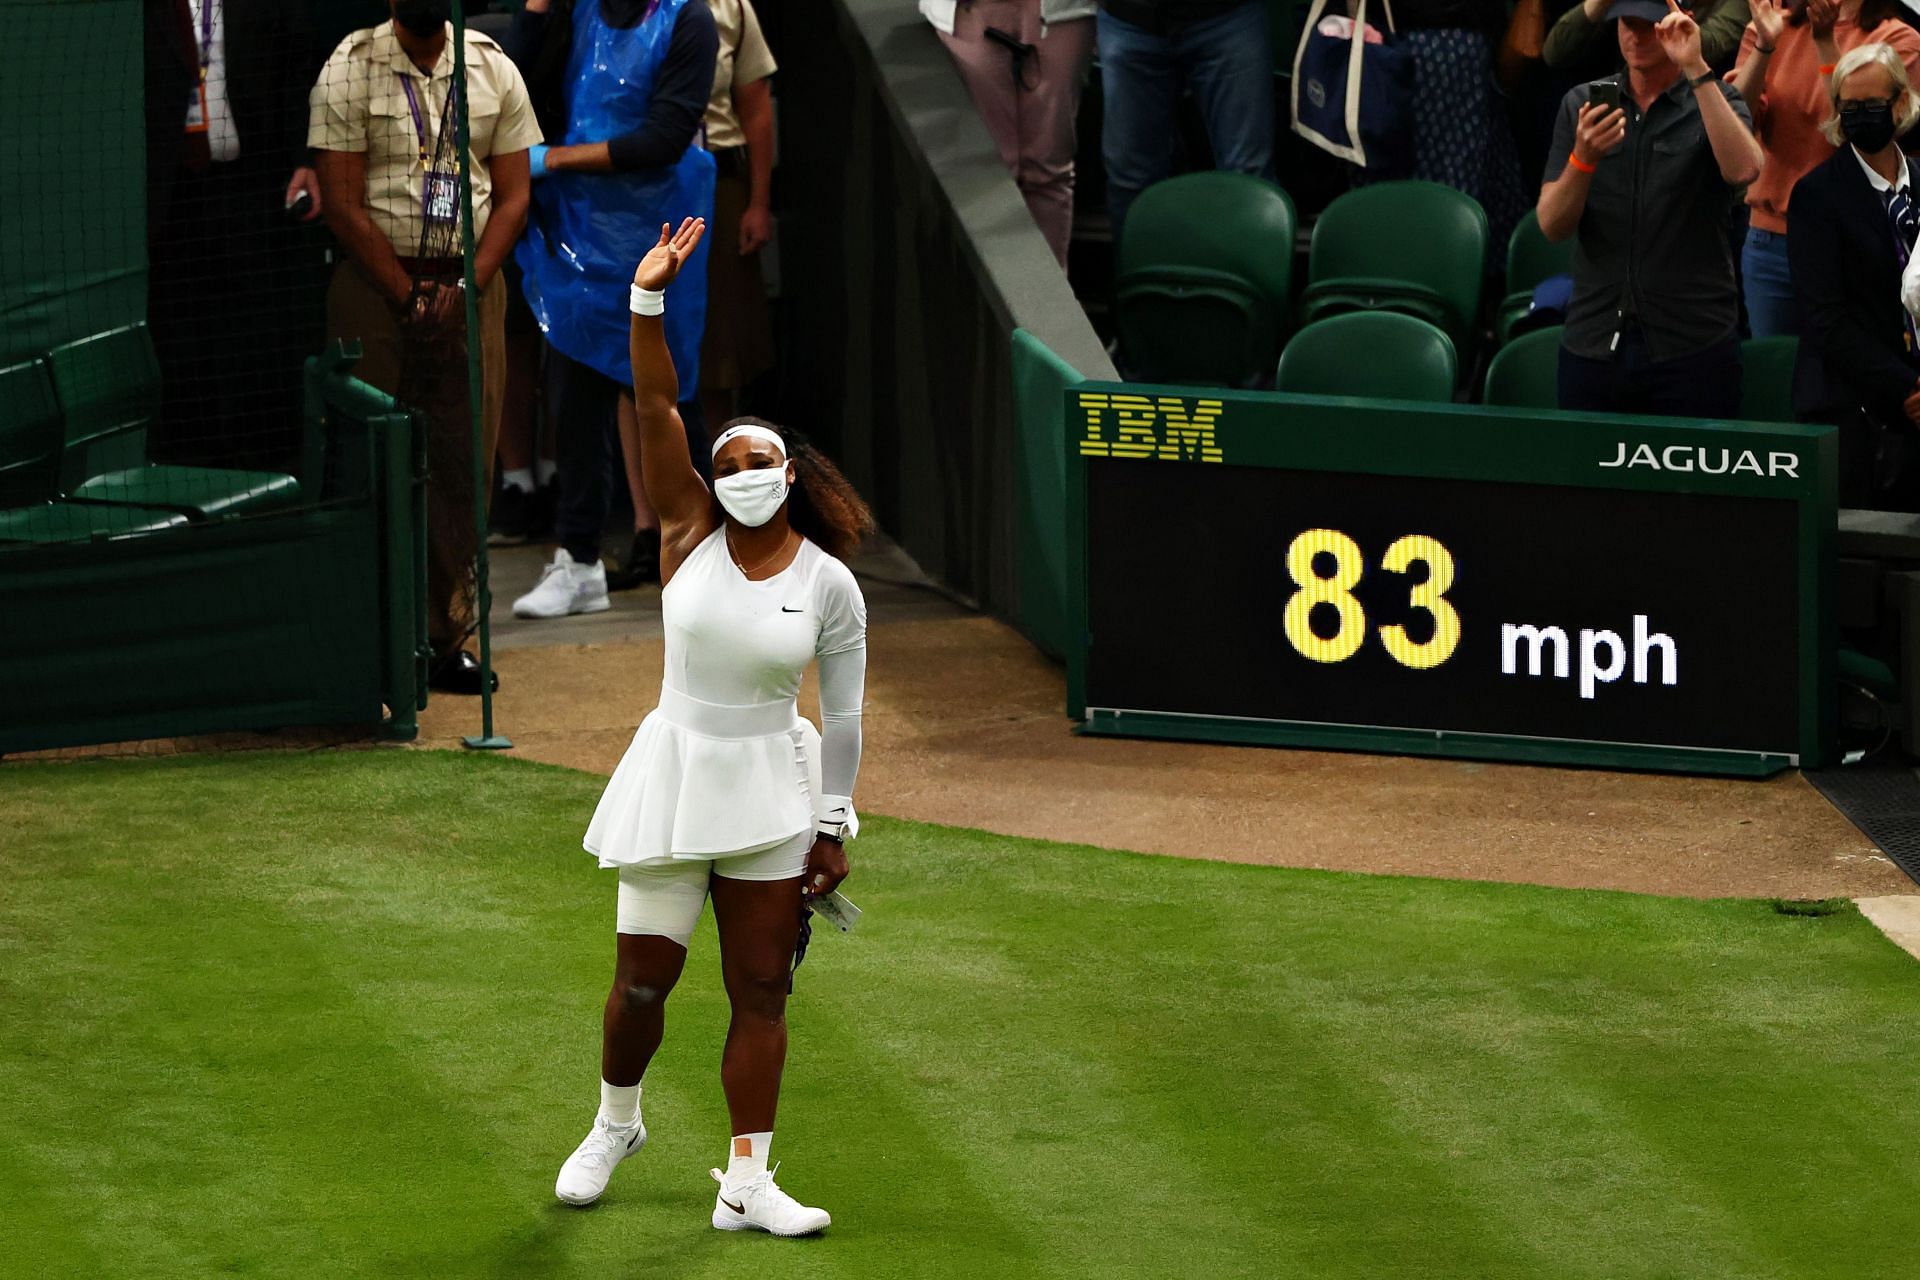 Williams has not played a match since she sustained an injury in the first round at Wimbledon last year